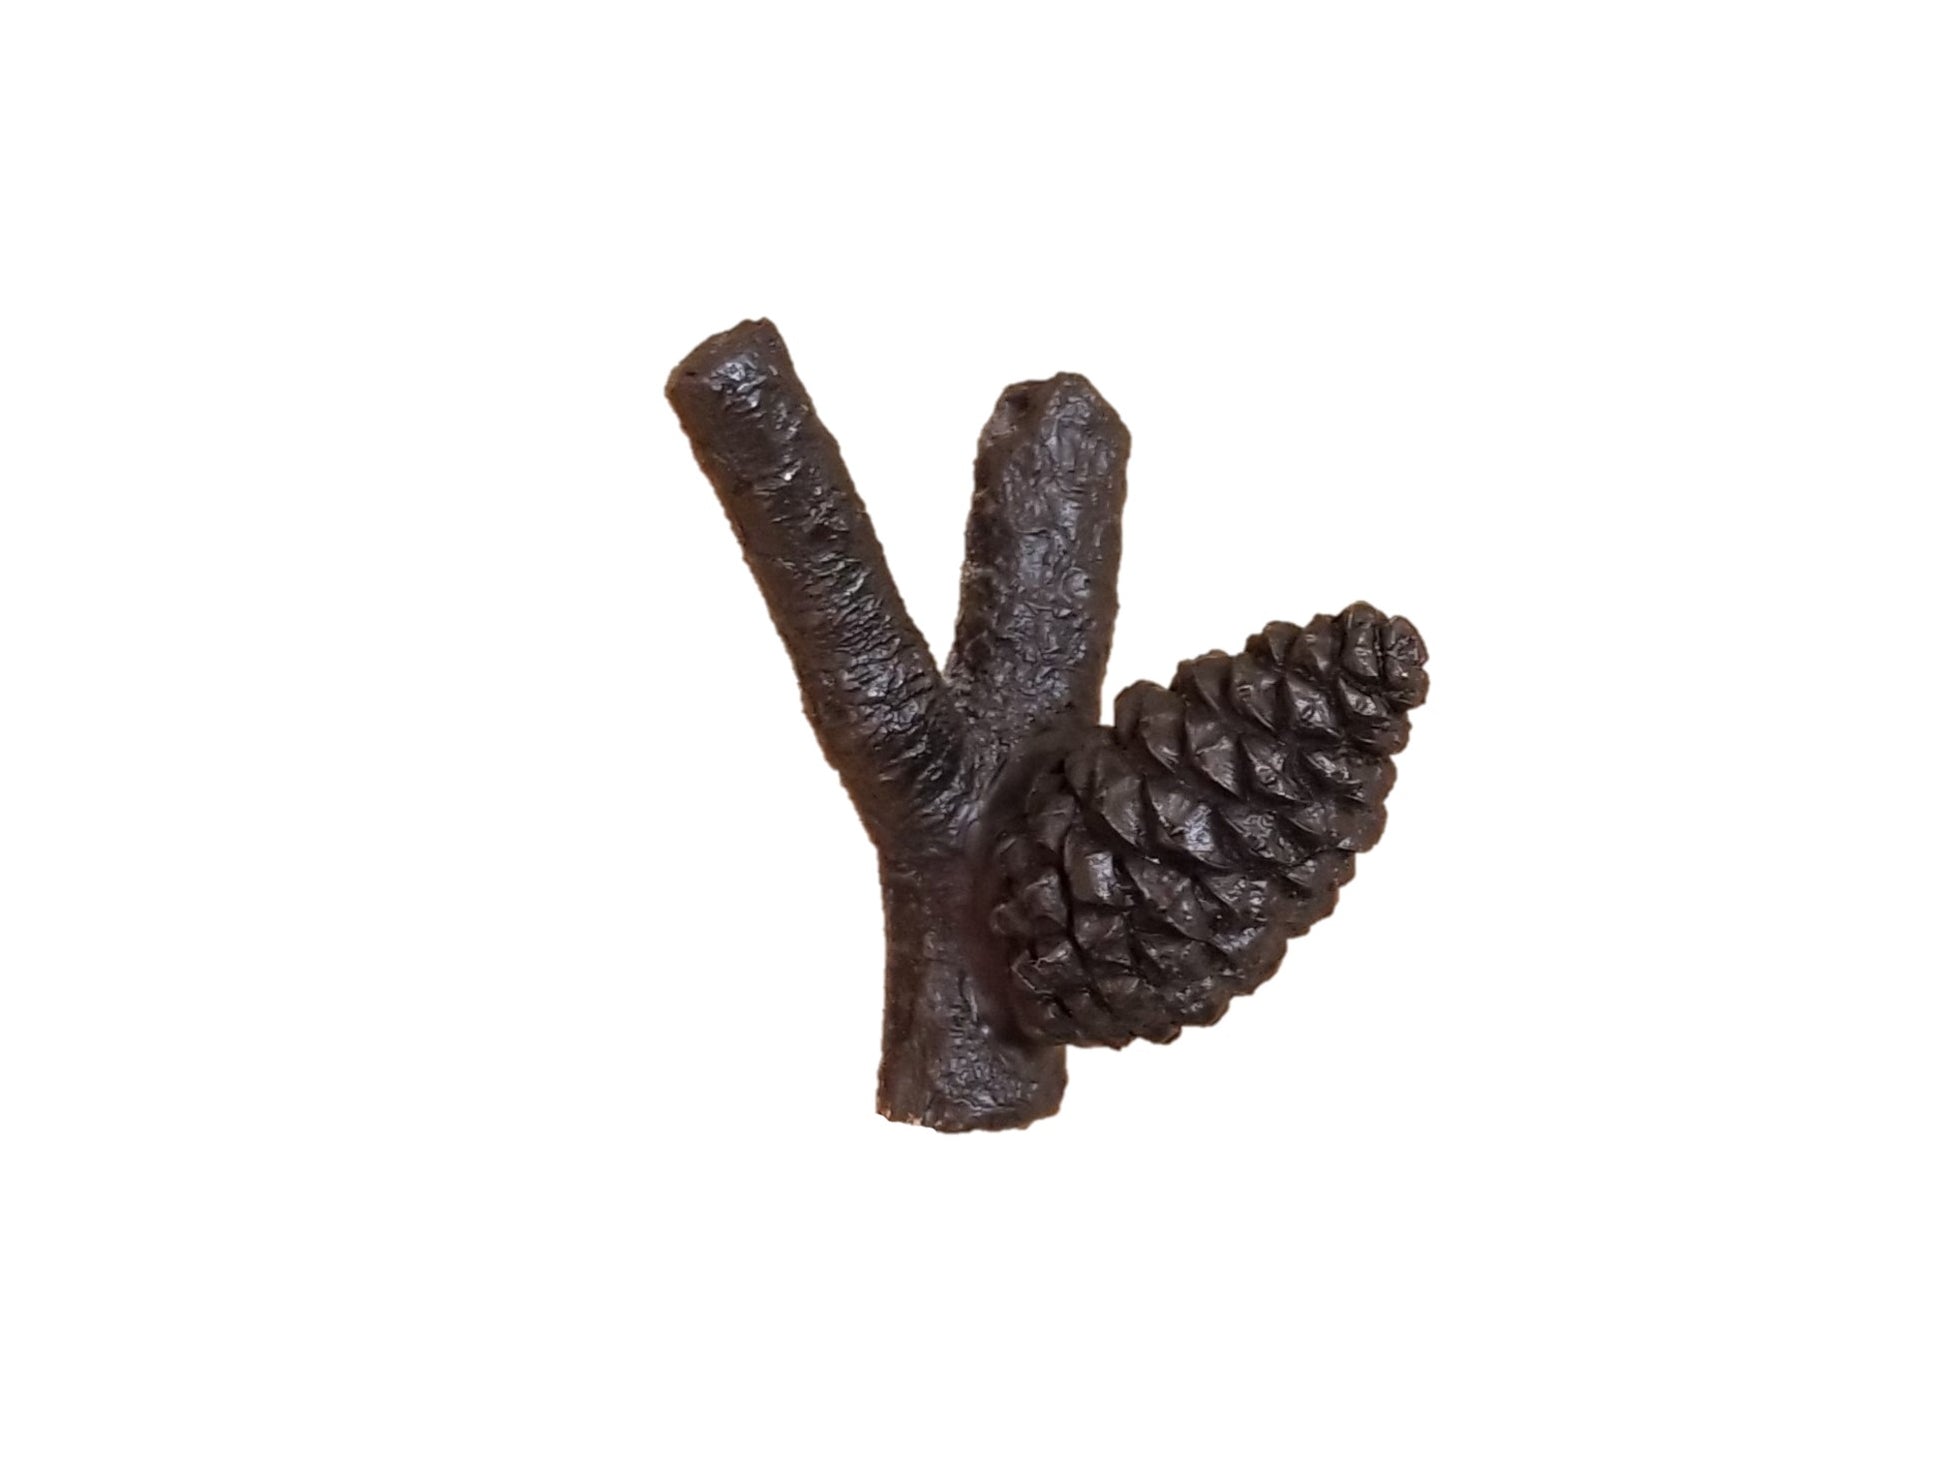 Y-Branch and Pine Cone Cabinet Knob made of bronze